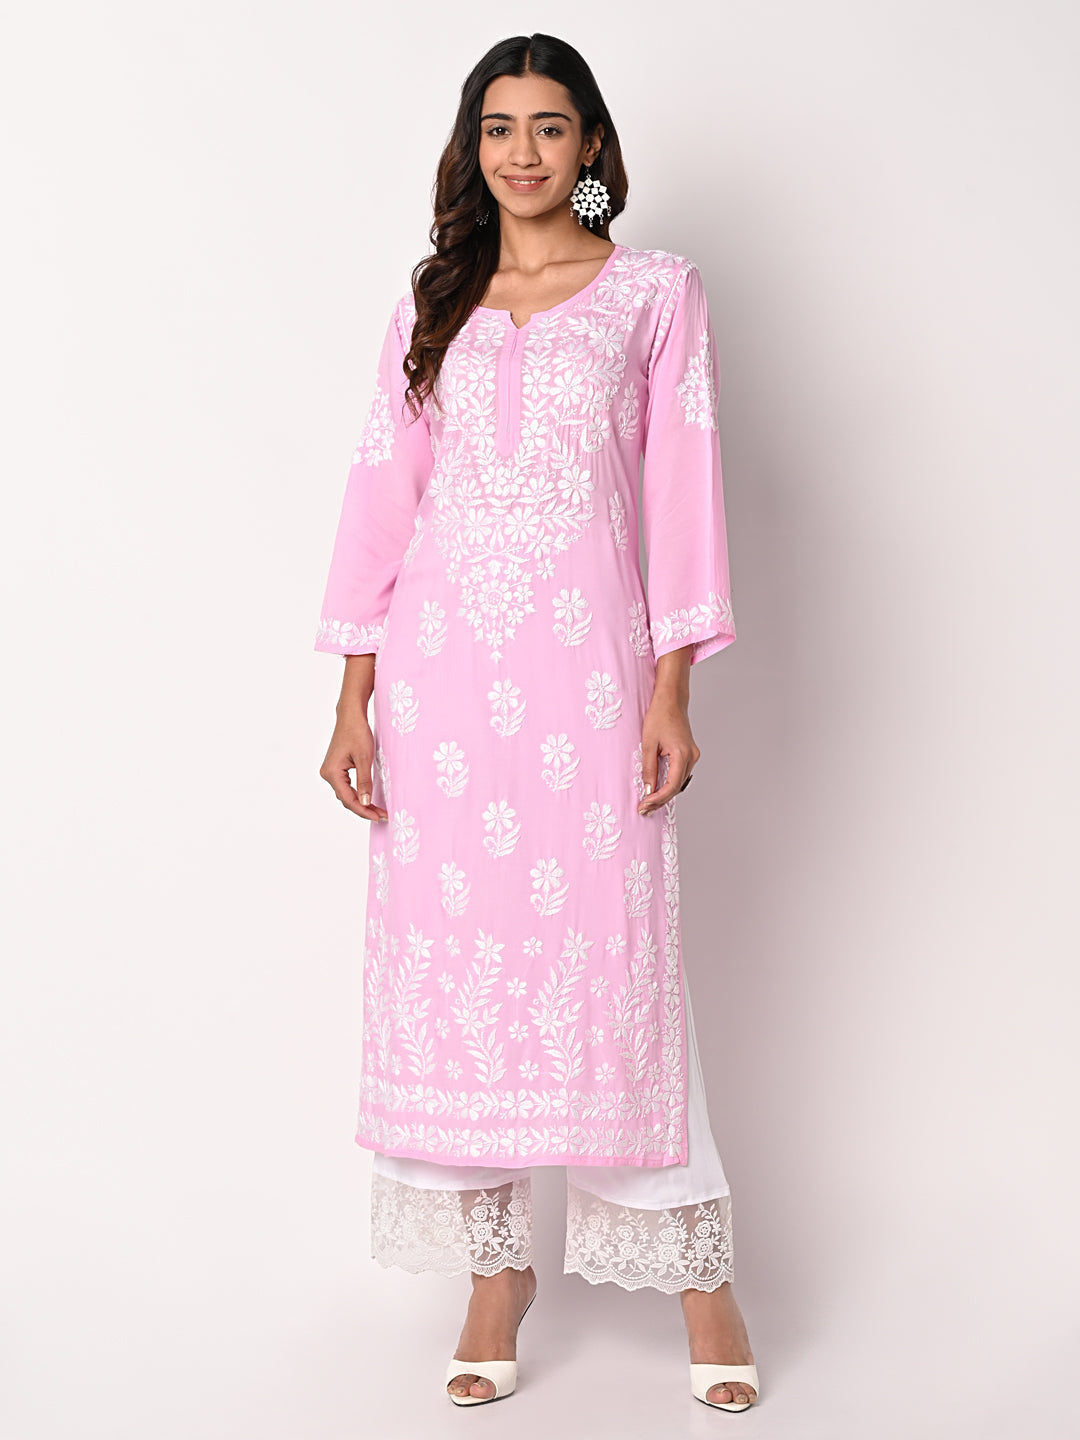 fcity.in - Queenley Chikan Embroidery Kurti Plazo Set With Net Embroidery